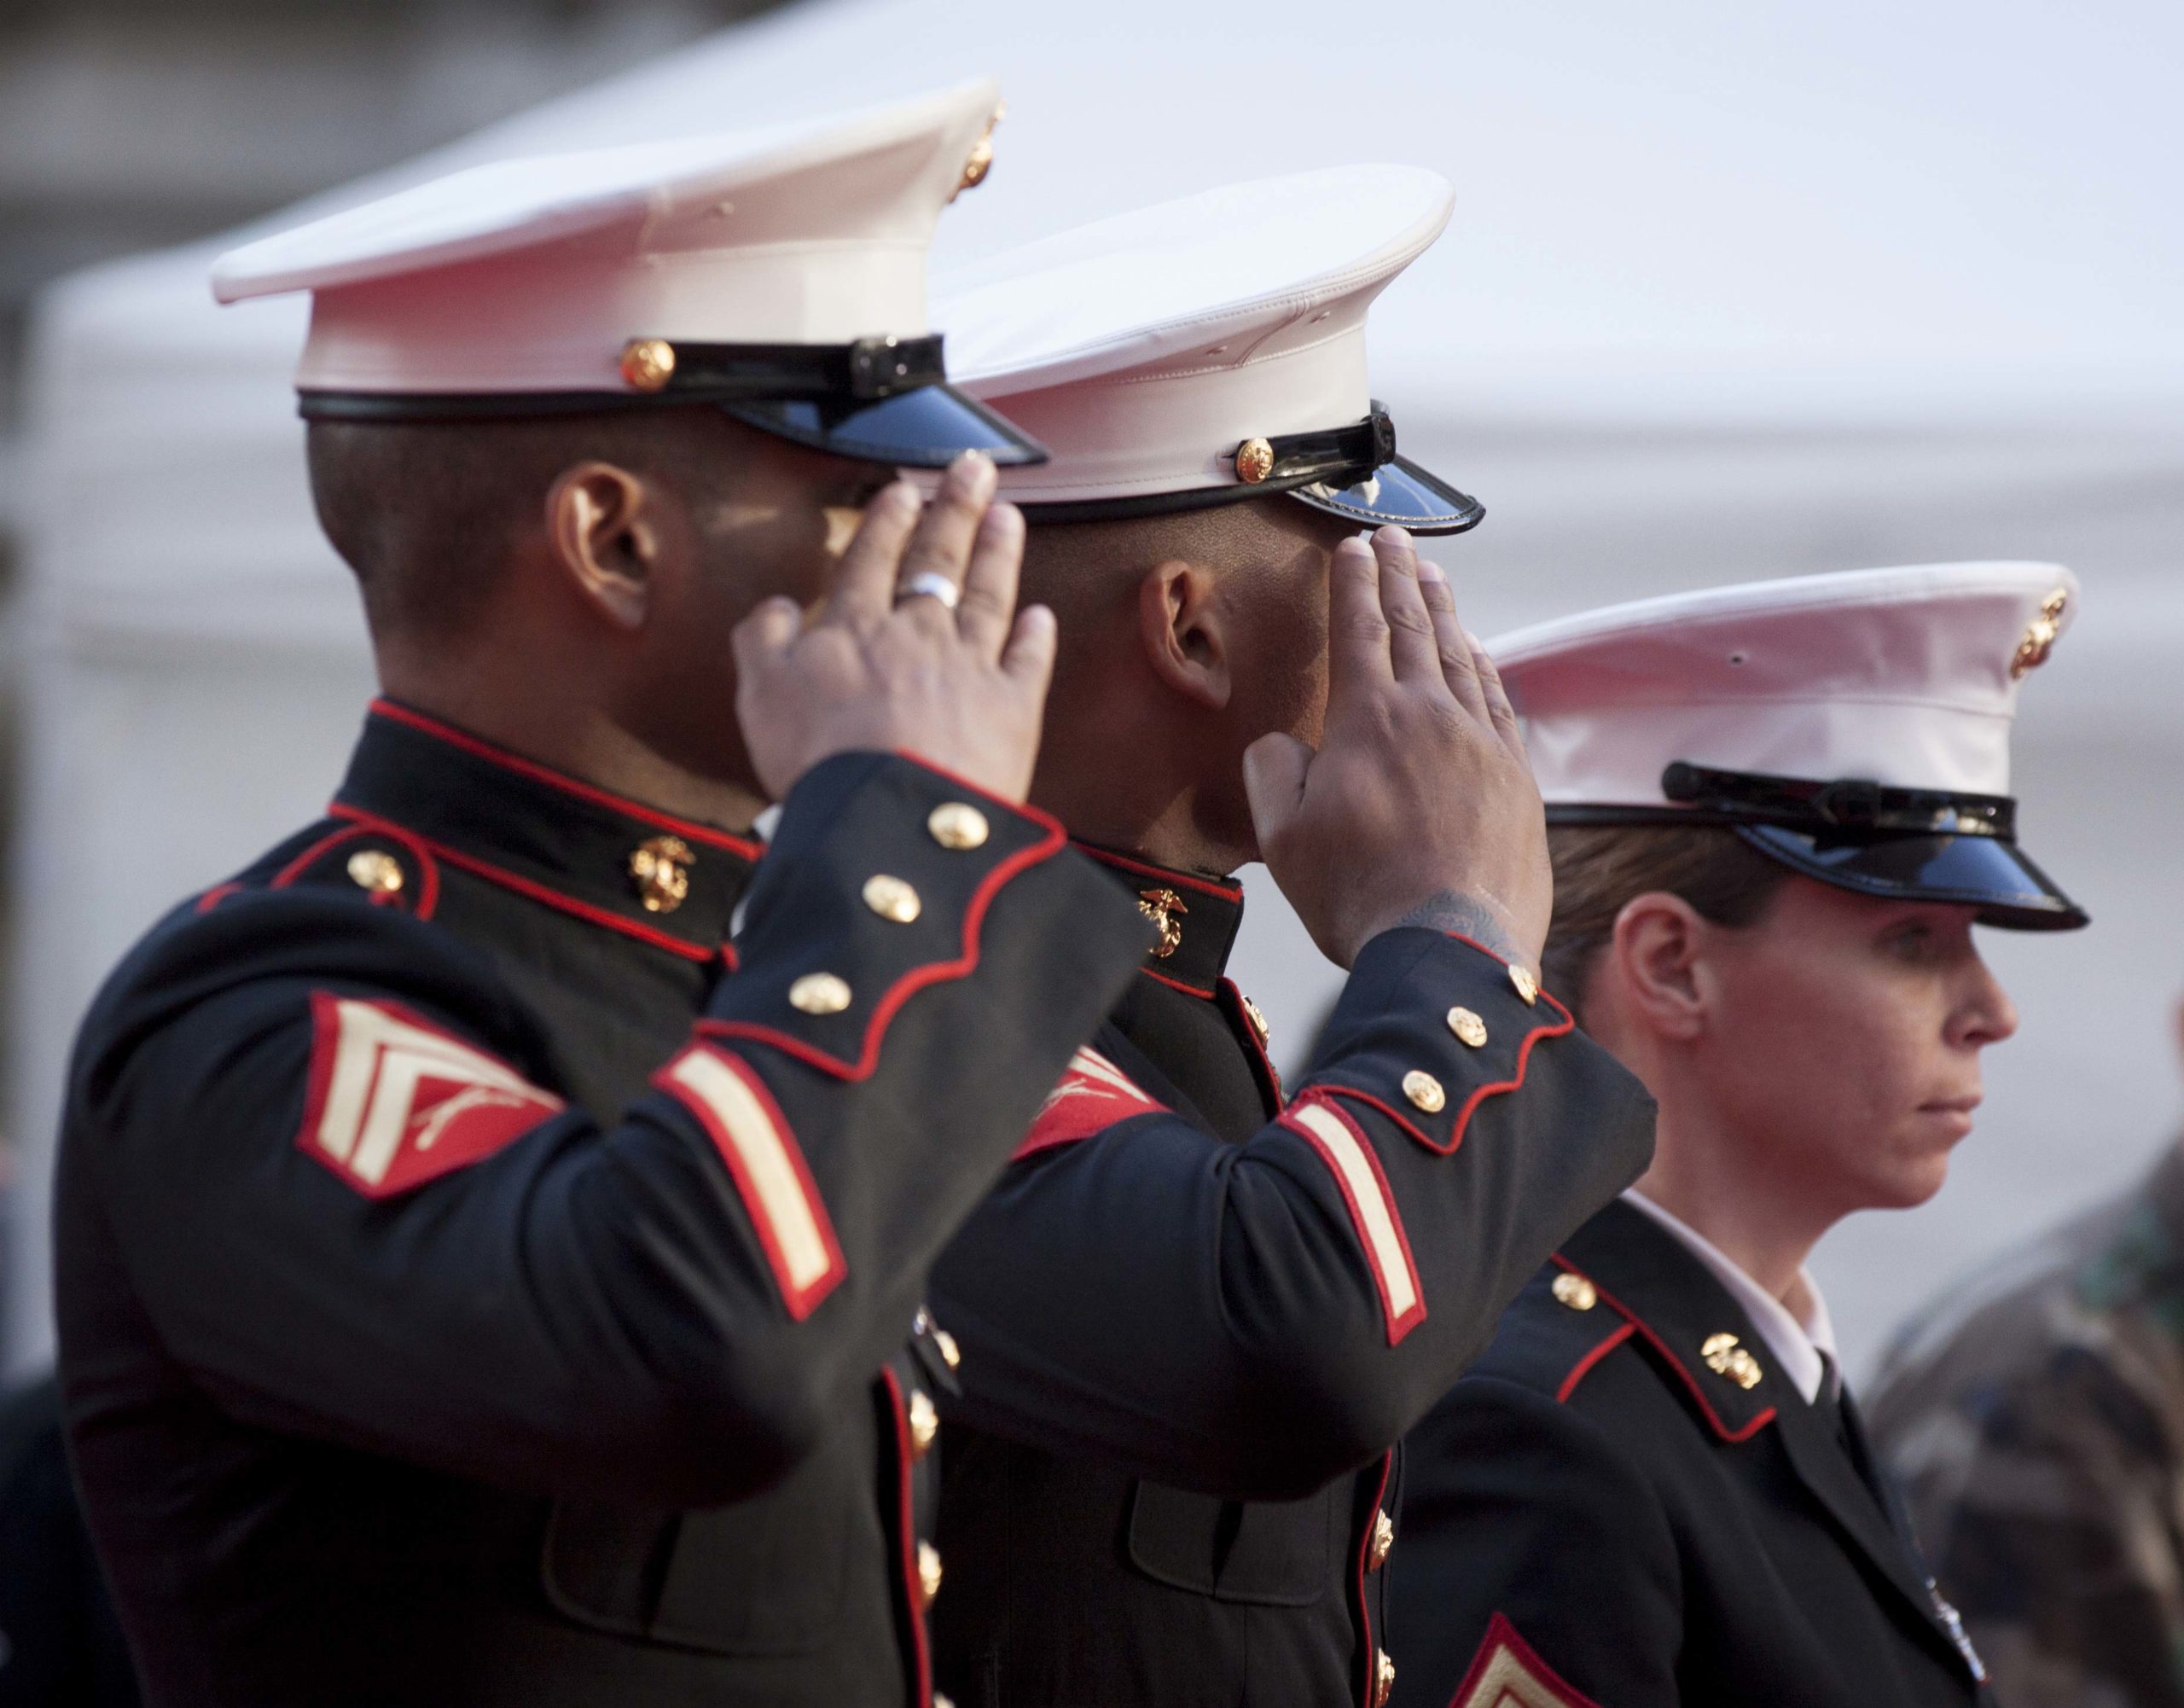 Two US Marines salute as they march past the VIP stage during the 2014 America's Parade held on Veterans Day in New York City on November 11, 2014.